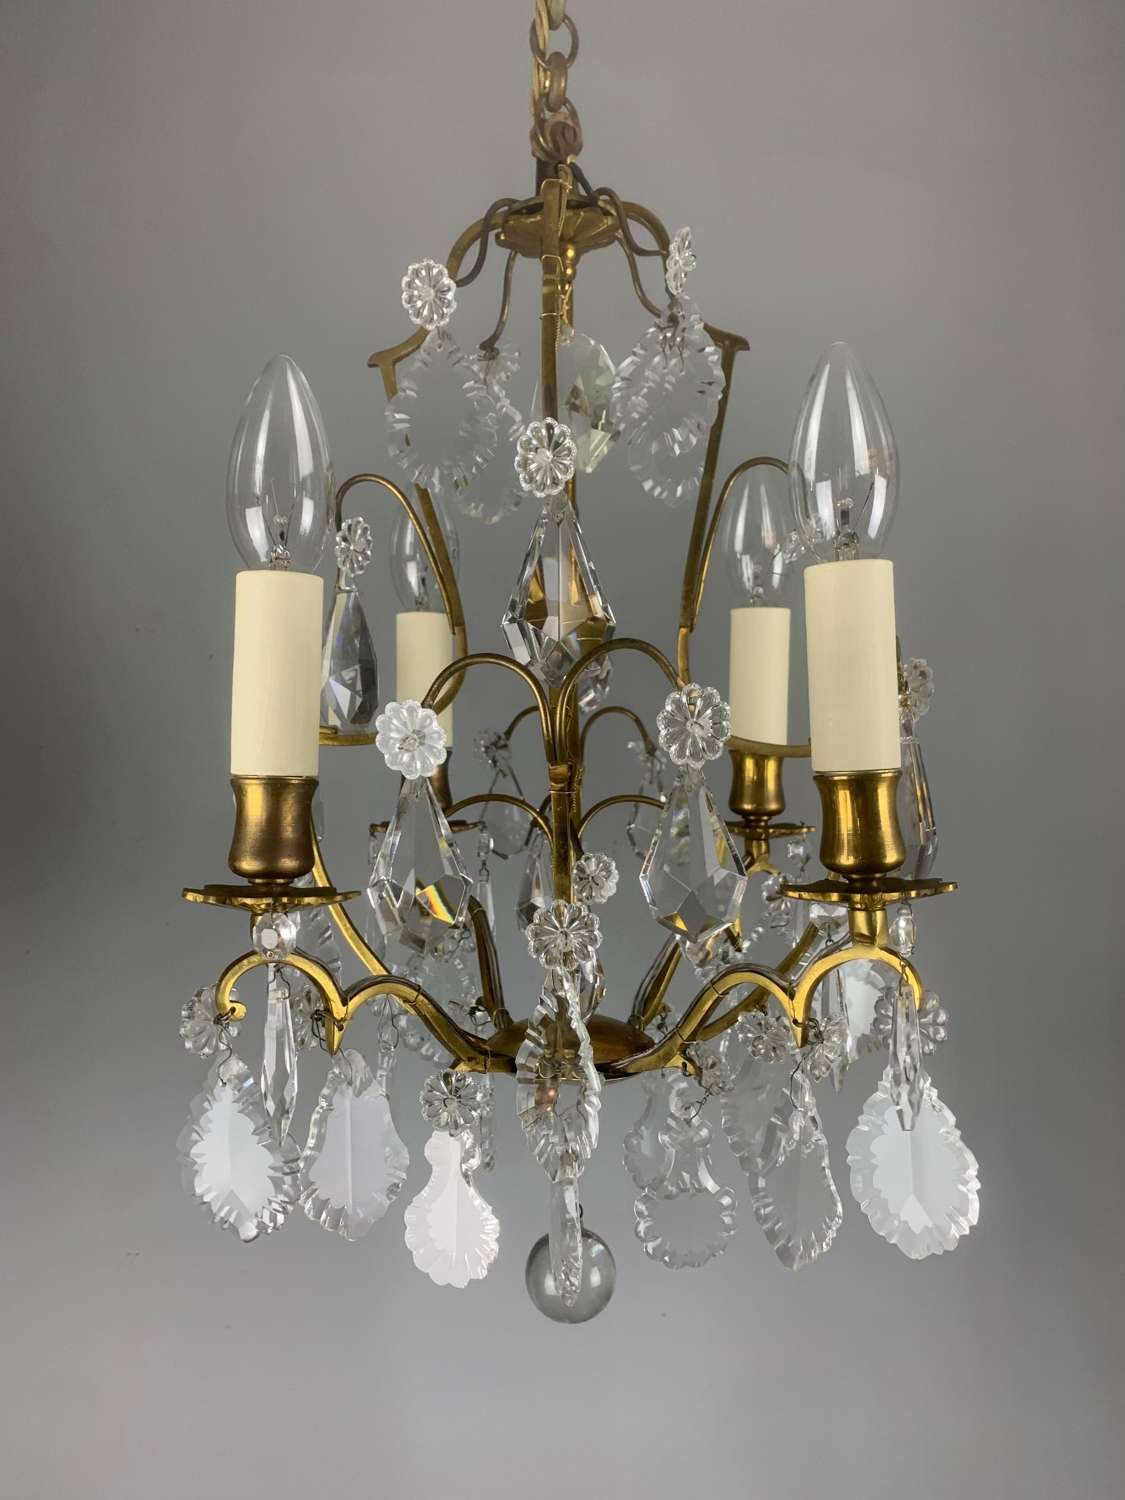 Small French Antique Gilt Brass Birdcage Crystal Chandelier